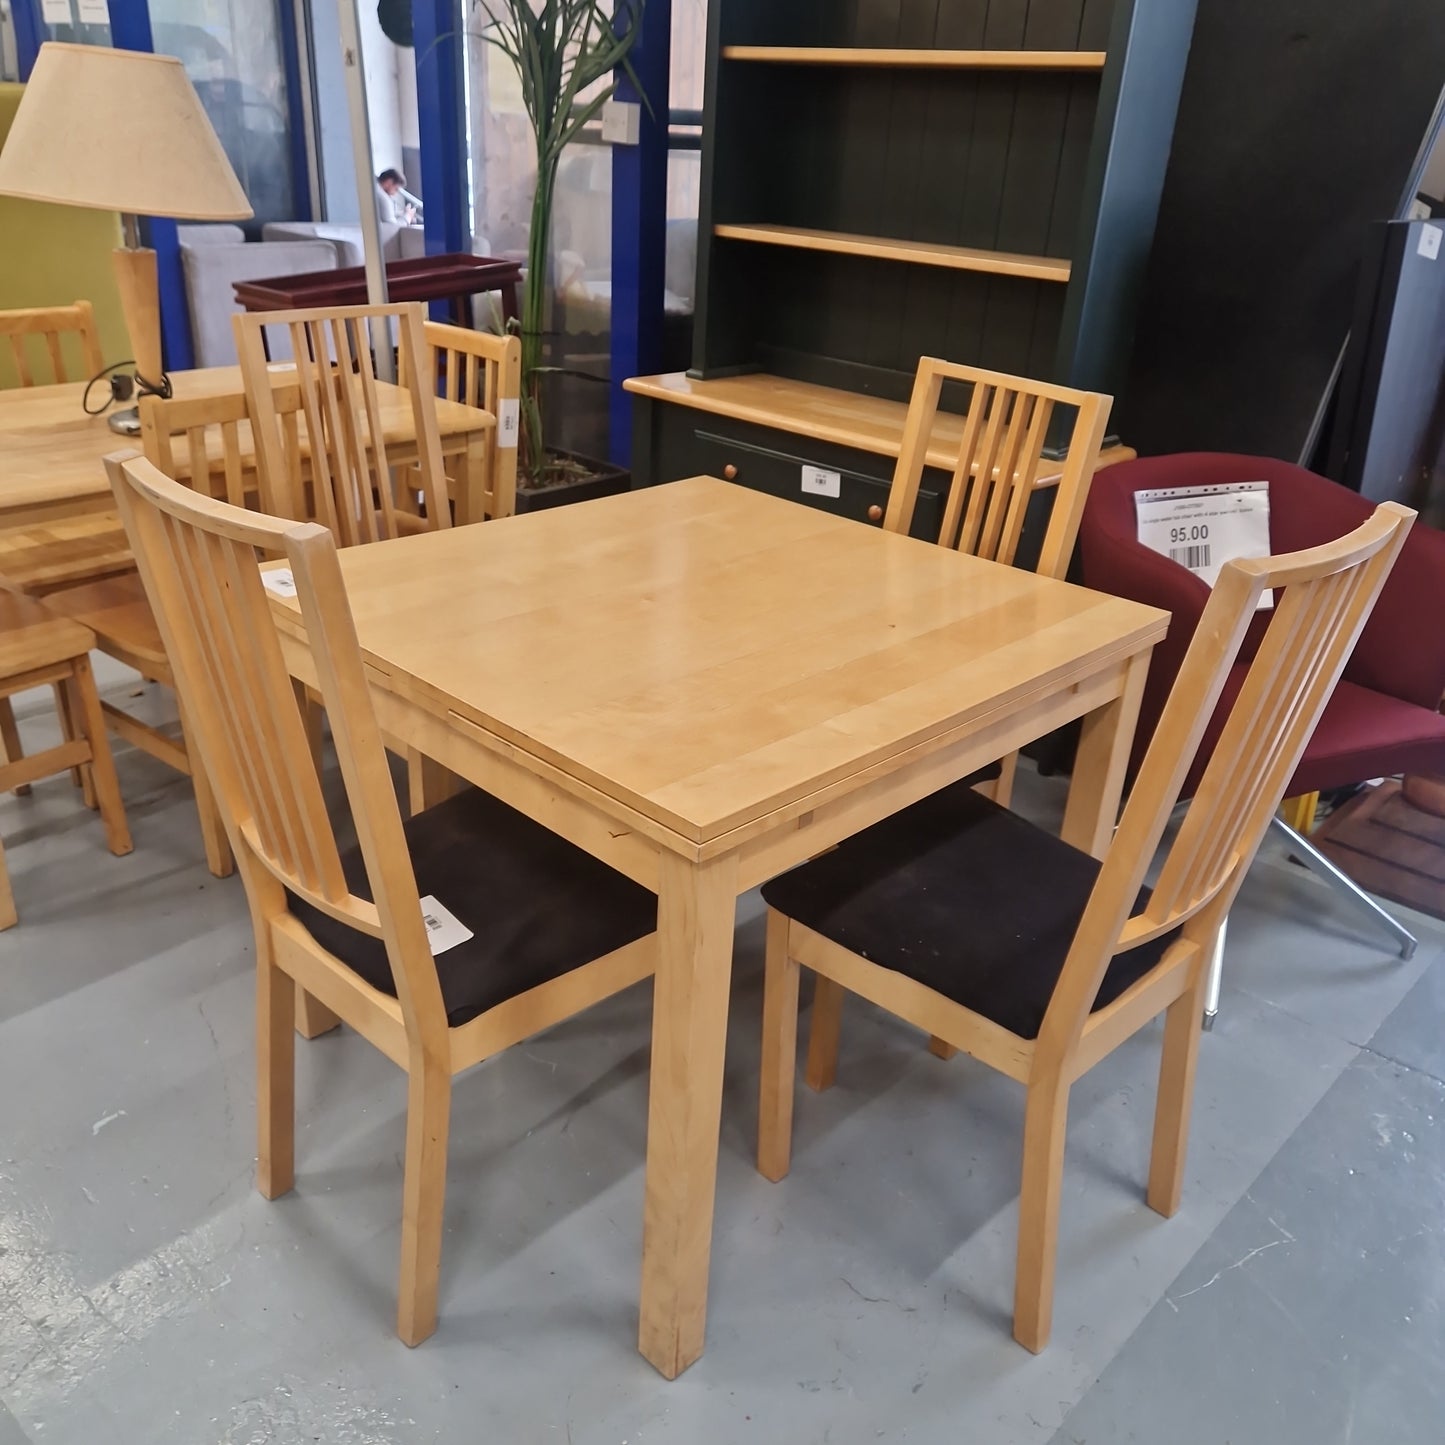 Square pine kitchen table cw 4 matching chairs